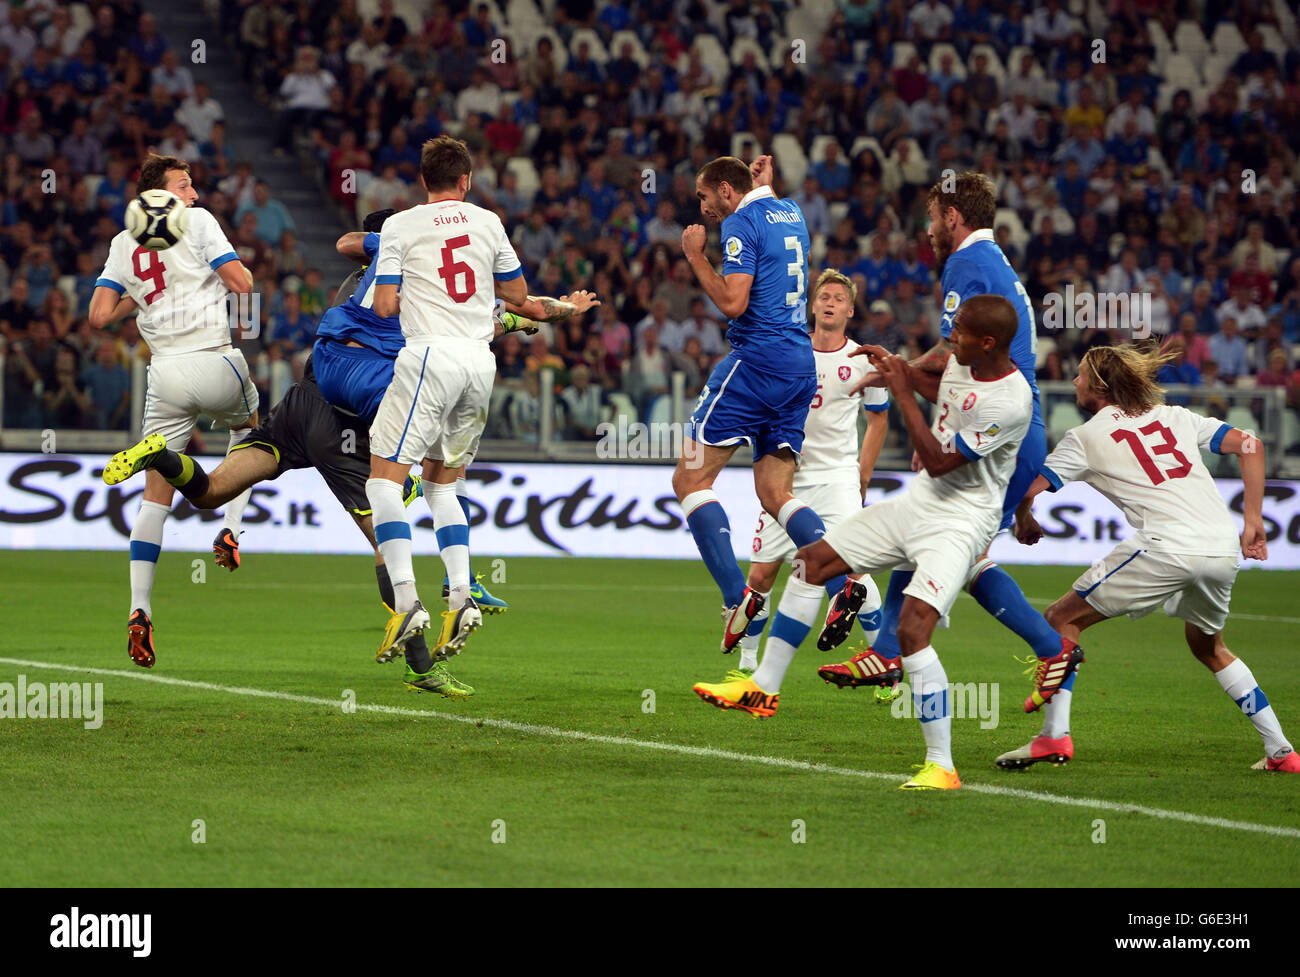 Soccer - 2014 FIFA World Cup - Qualifier - Group B - Italy v Czech Republic - Juventus Stadium. Italy's Giorgio Chiellini (no3) scores their equalising goal Stock Photo